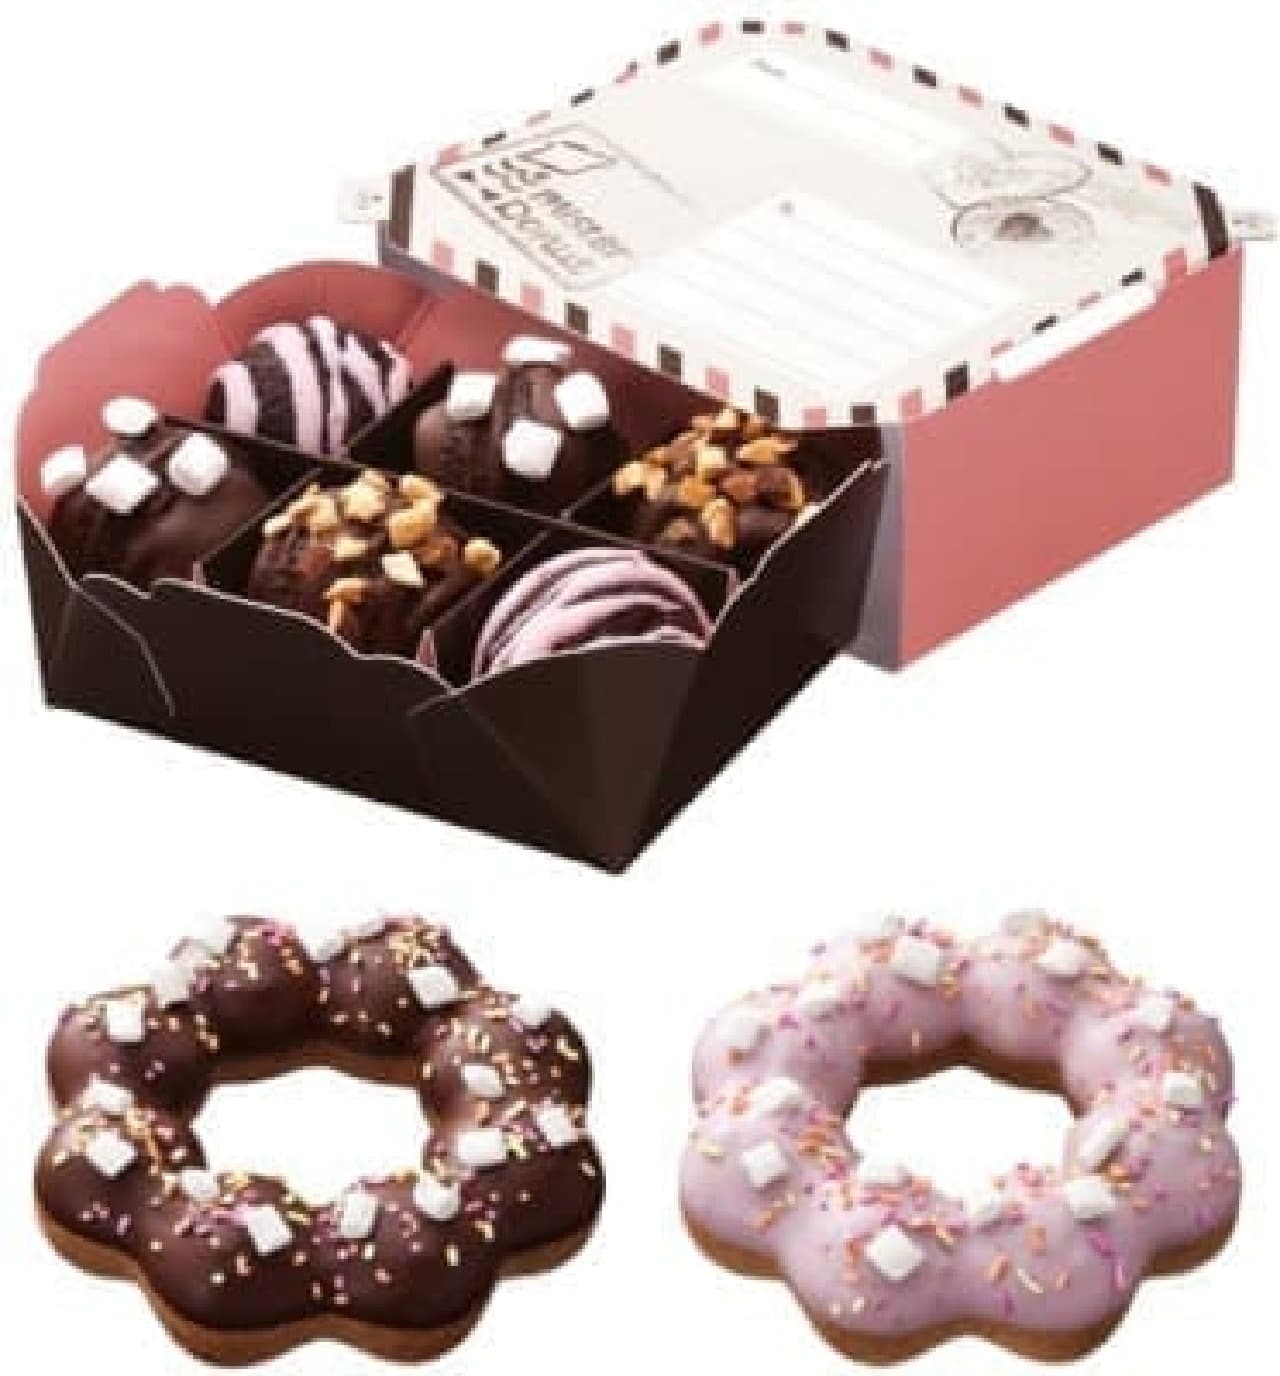 Three kinds of "Valentine donuts" are now available